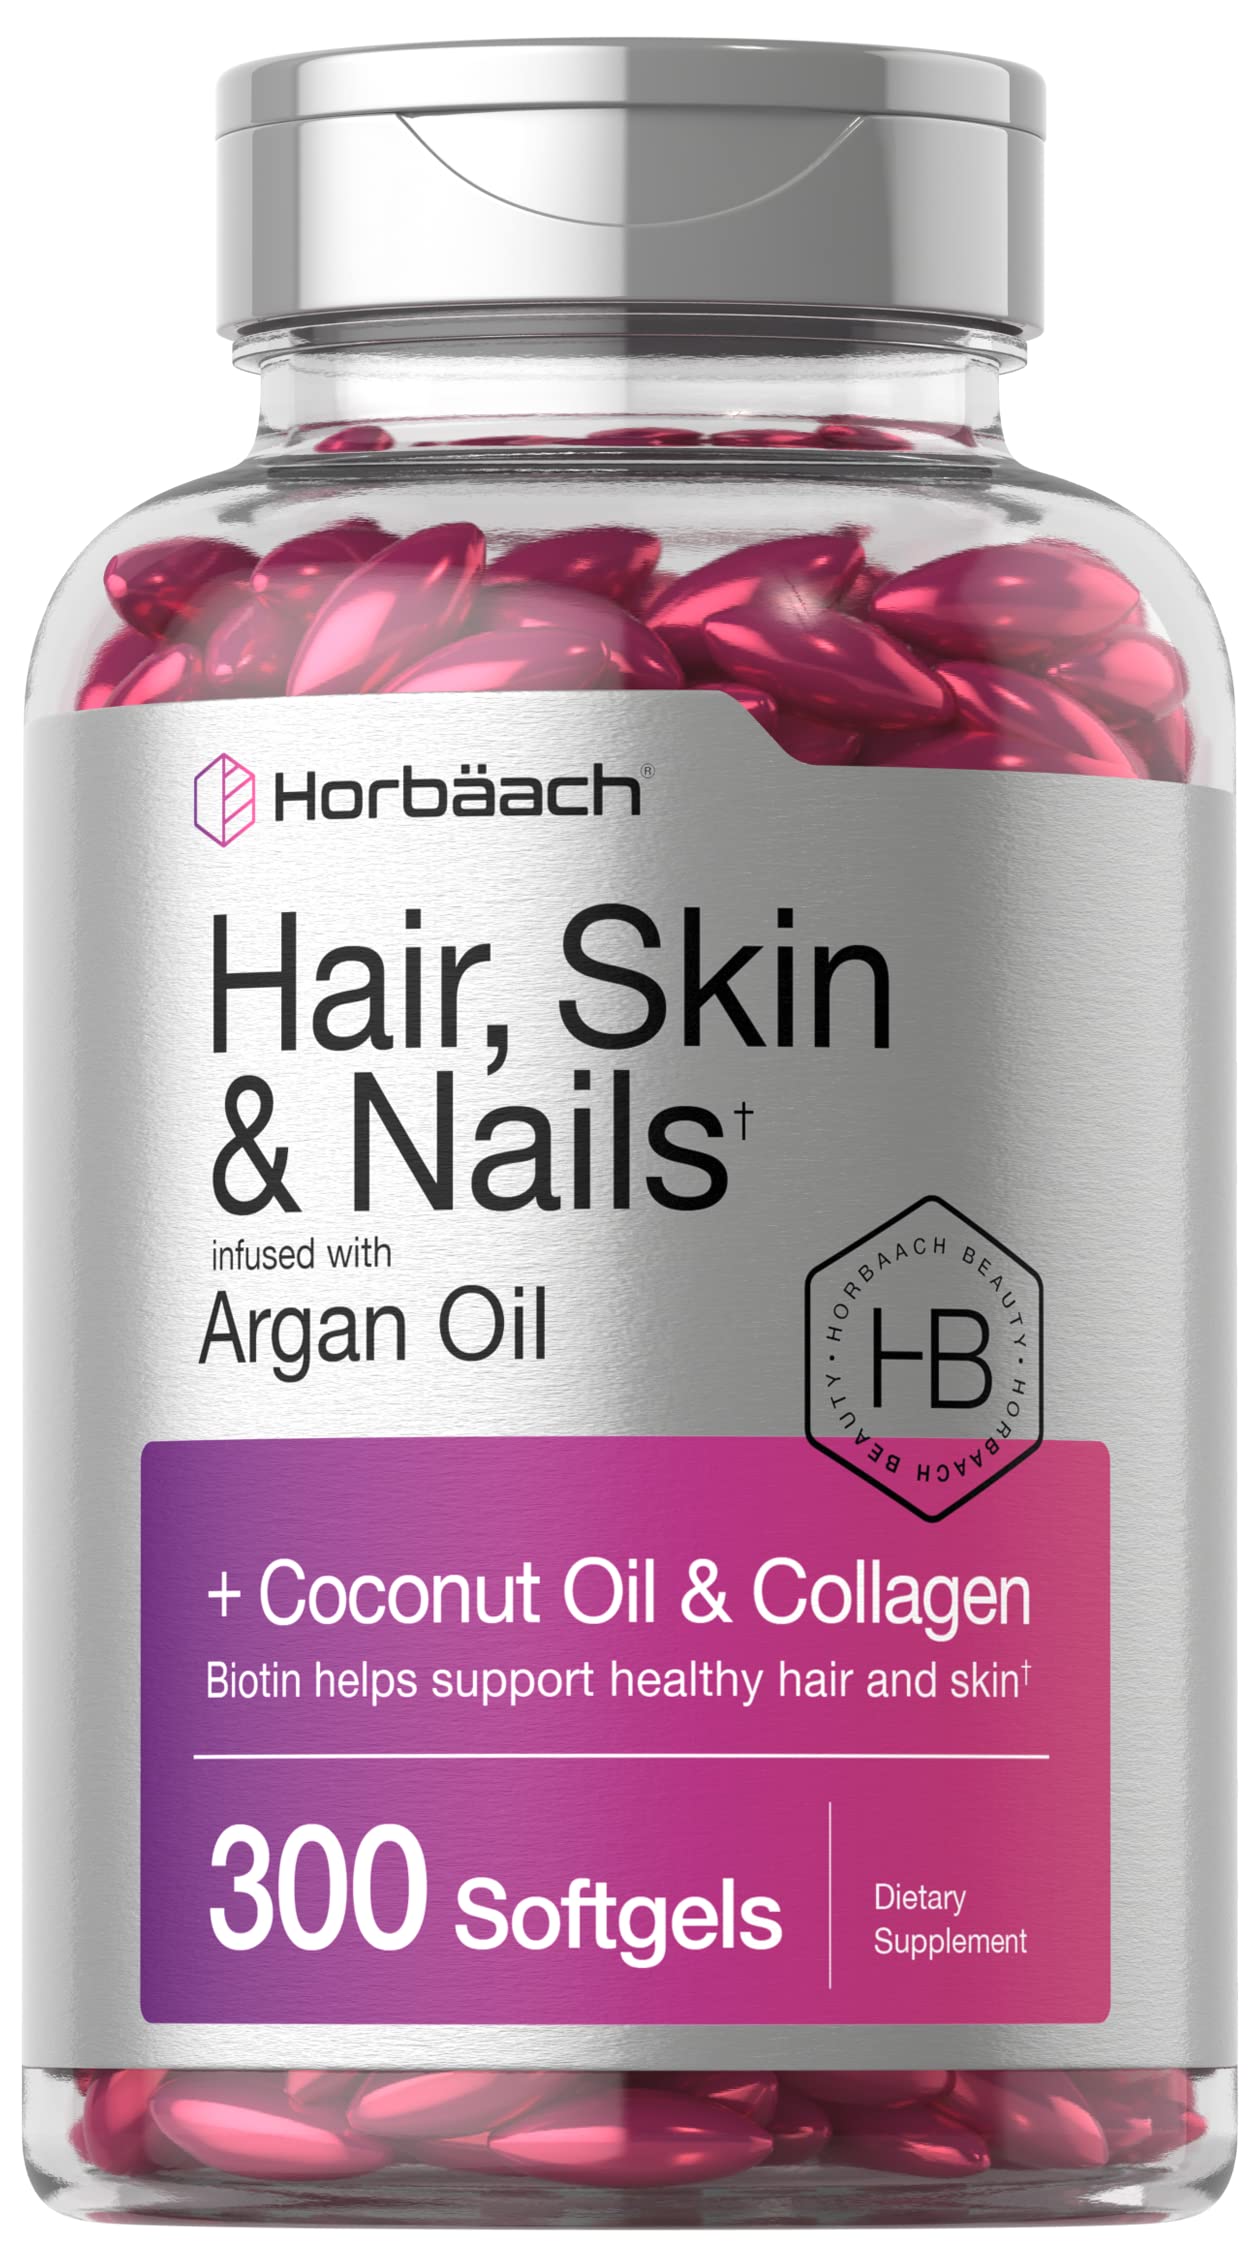 Mua Hair Skin and Nails Vitamins | 300 Softgels | with Biotin and Collagen  | Infused with Argan Oil and Coconut Oil | Non-GMO, Gluten Free Supplement  | by Horbaach trên Amazon Mỹ chính hãng 2023 | Giaonhan247